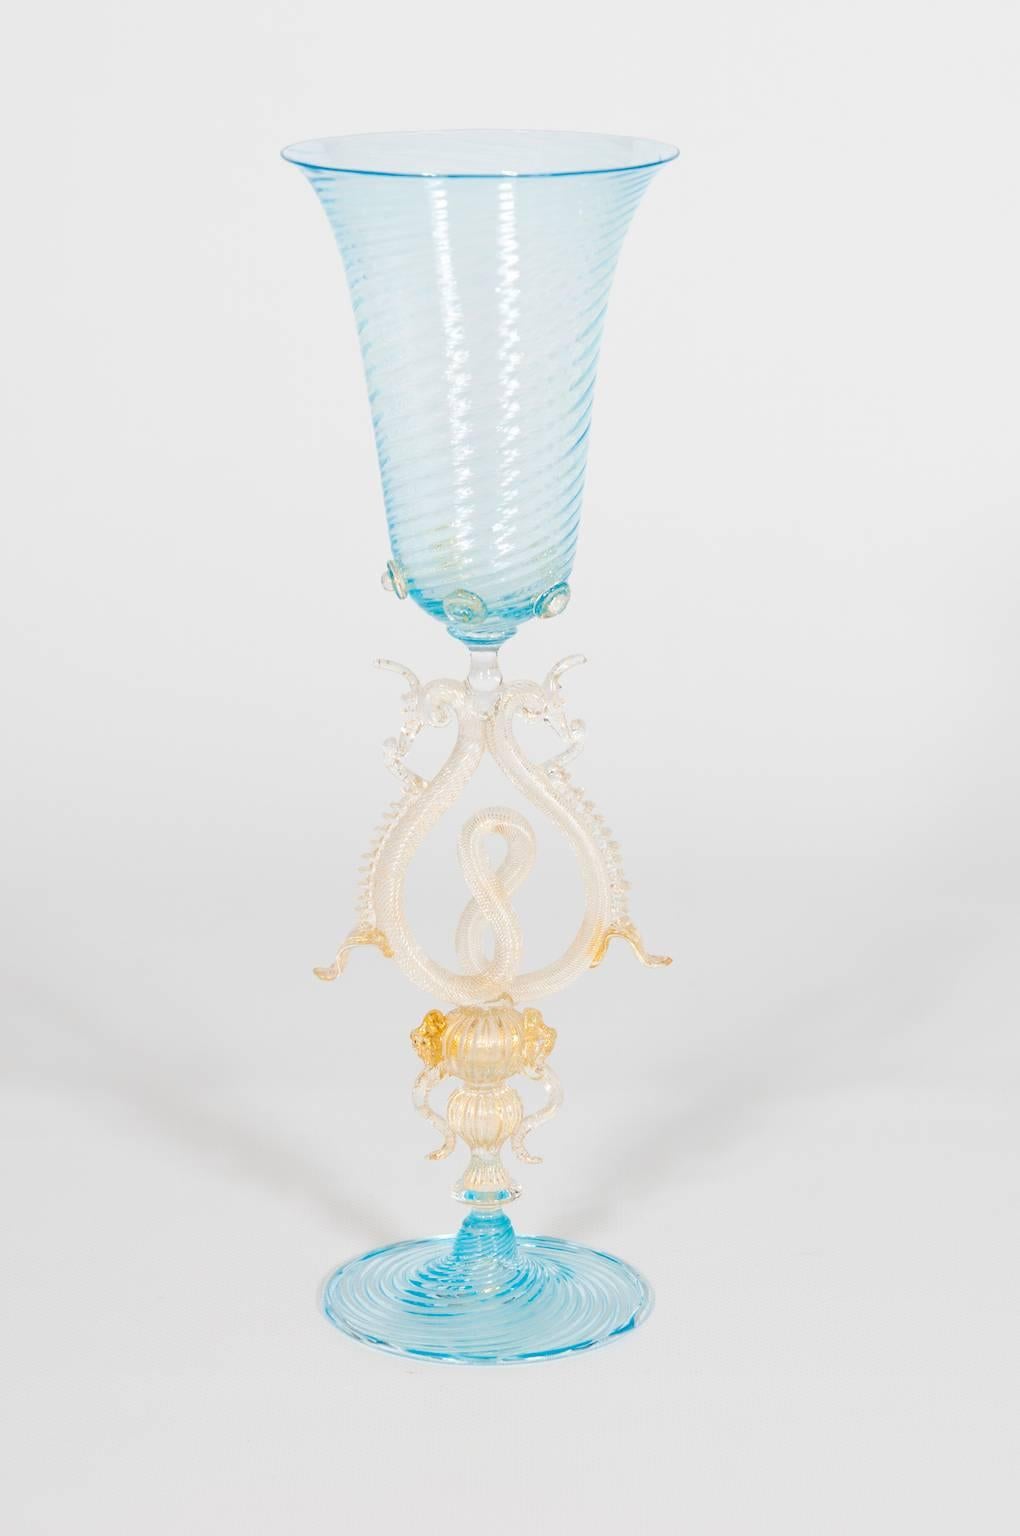 Unique elegant Italian Venetian handblown Goblet in Murano glass in very excellent original condition, circa 1970s having a light-blue base and a stem in gold with very sophisticated artistic working and a light-blue cup on the stem. The globet is